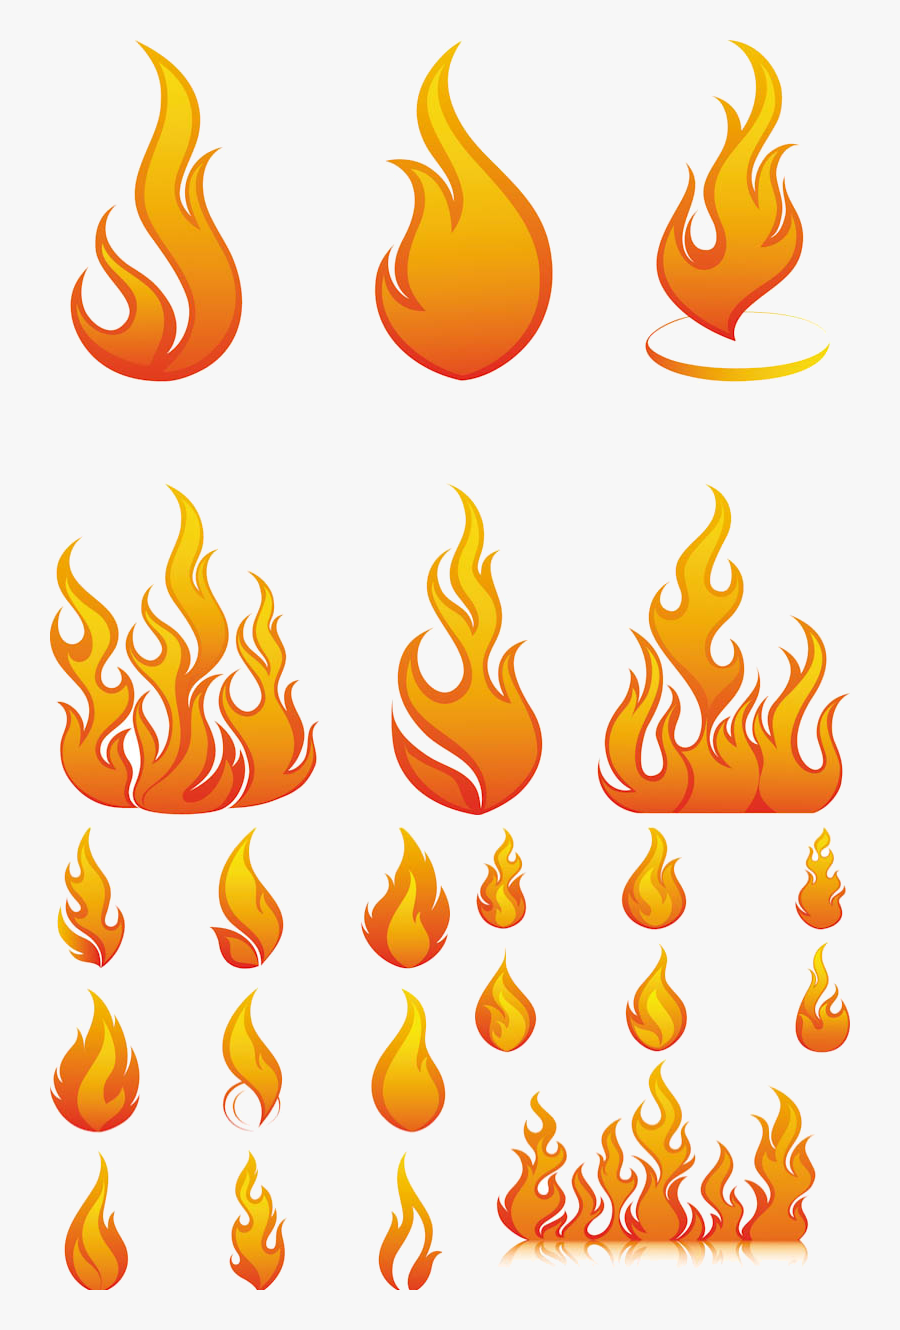 Flame Free Flames Or Fire Clipart And Cliparts For - Fire Flames Vector, Transparent Clipart